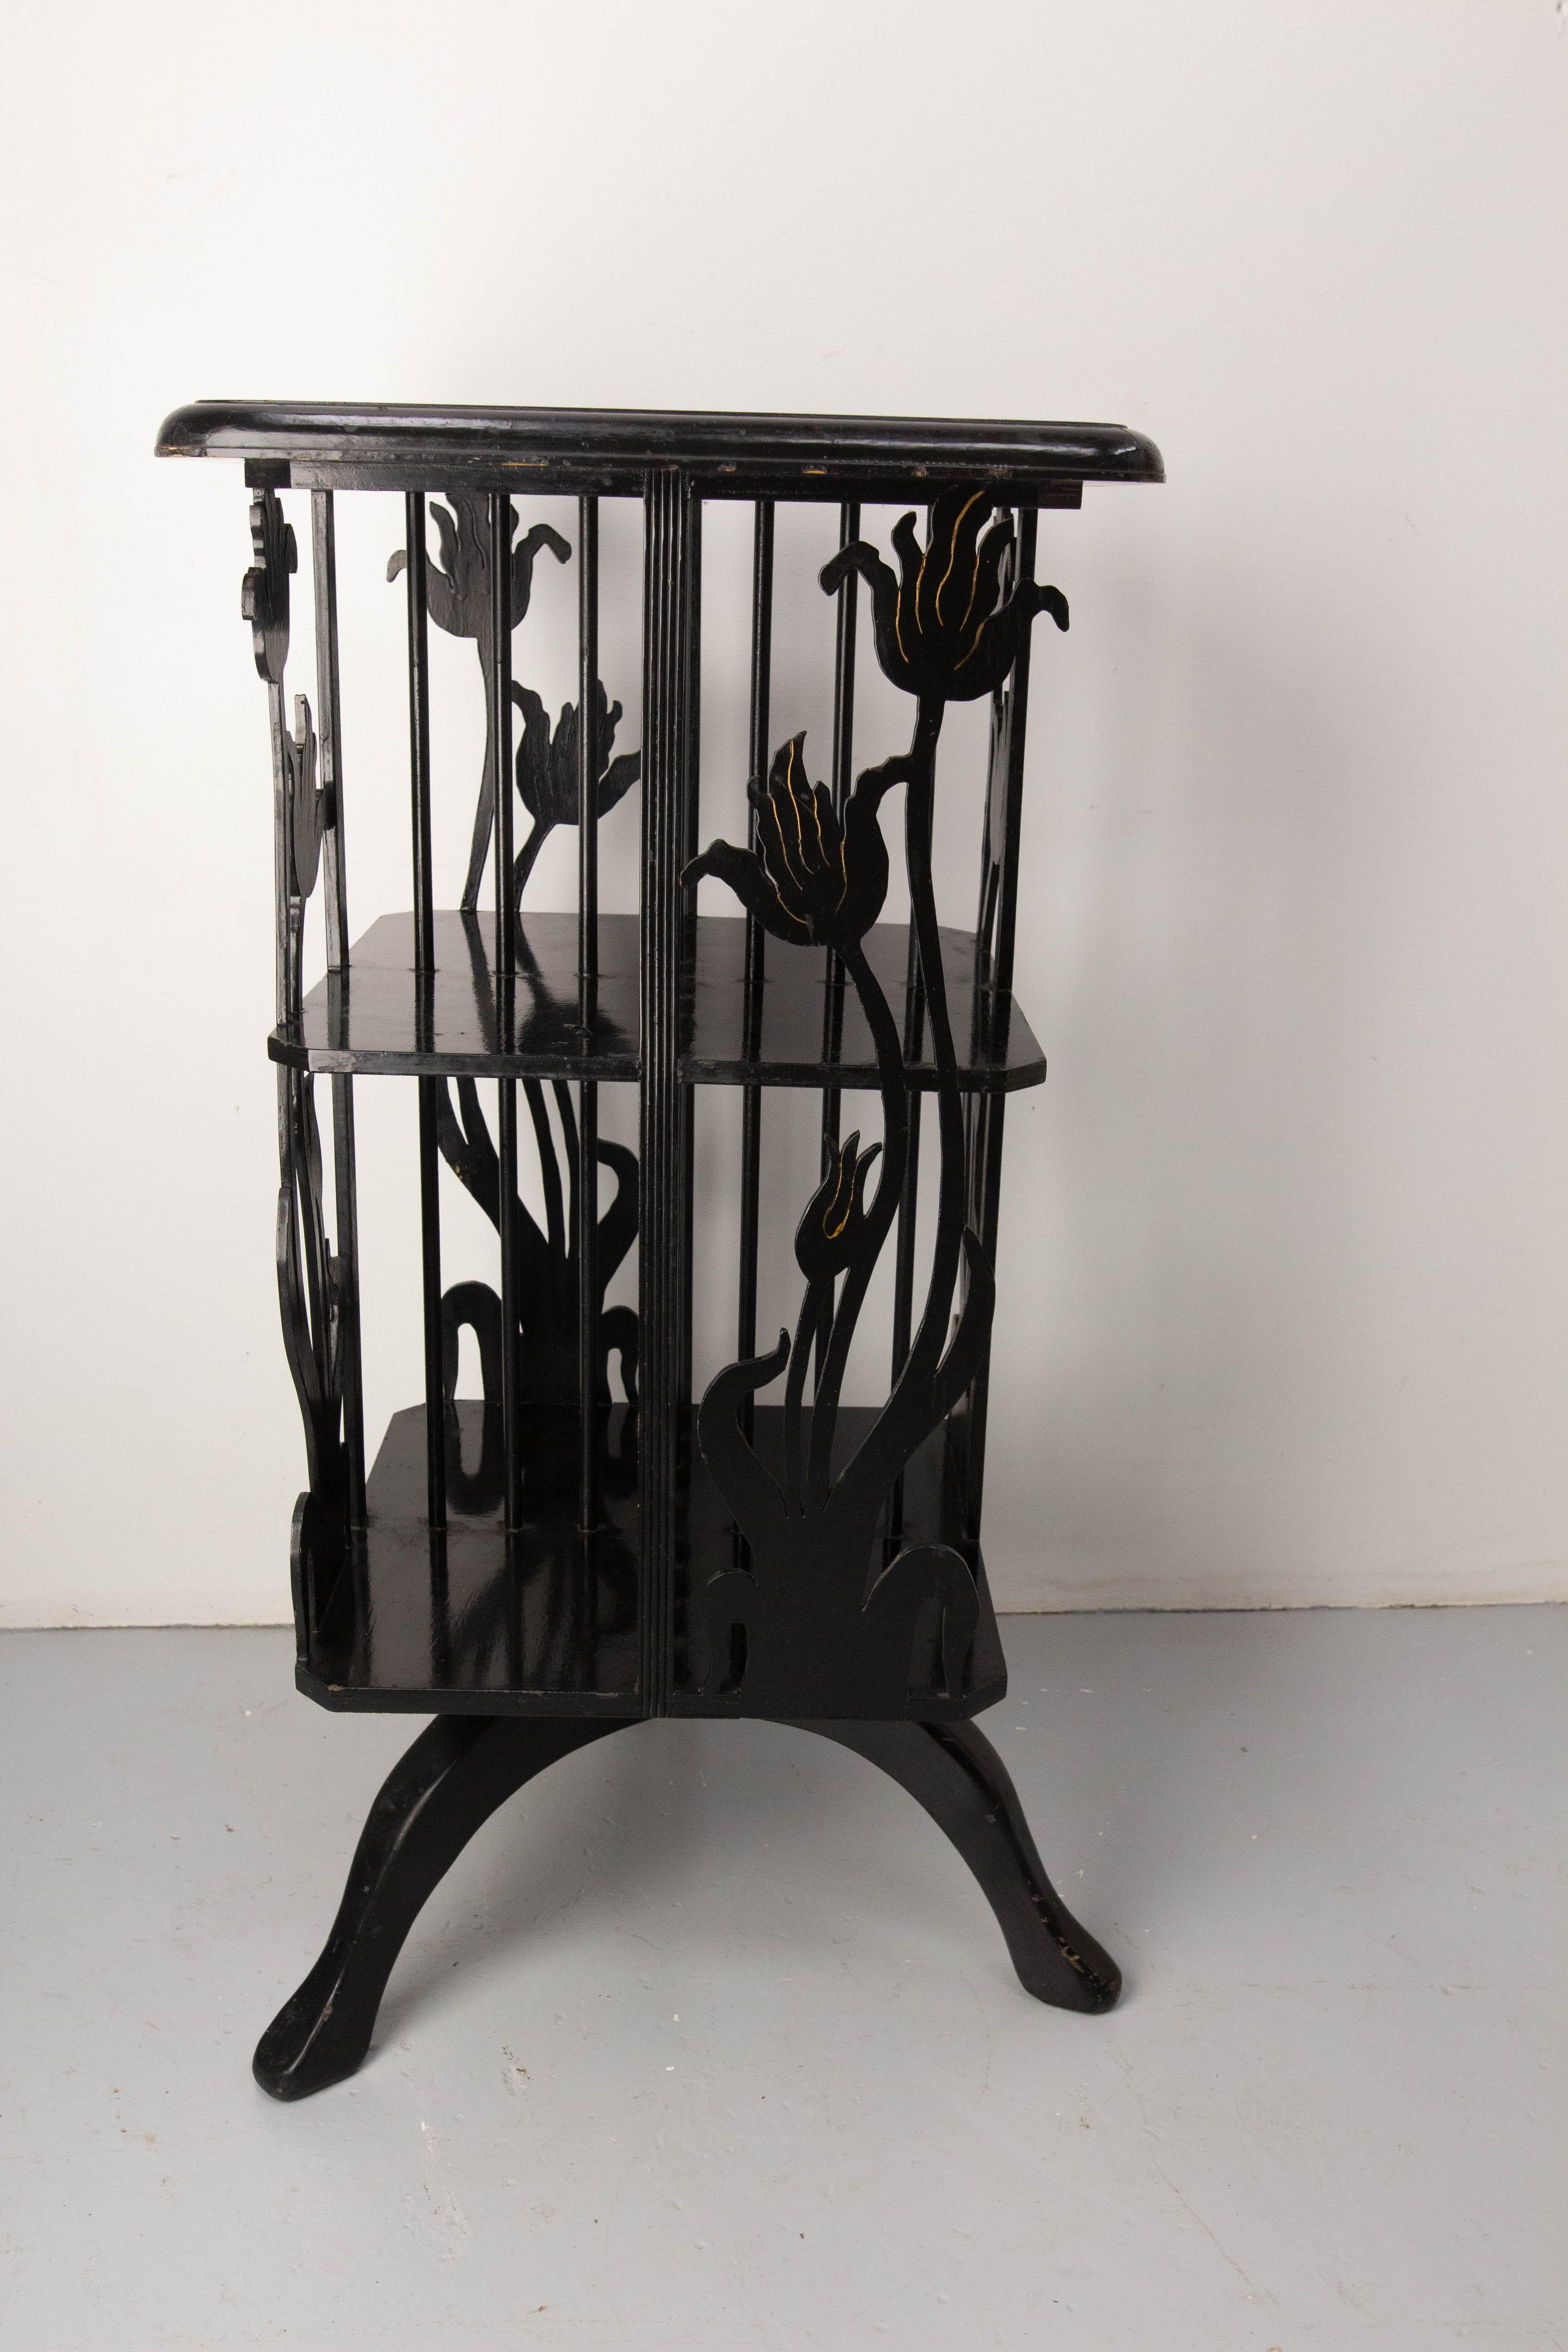 Early 20th Century Small Black Revolving Peony Bookcase, French Art Nouveau, circa 1910 For Sale